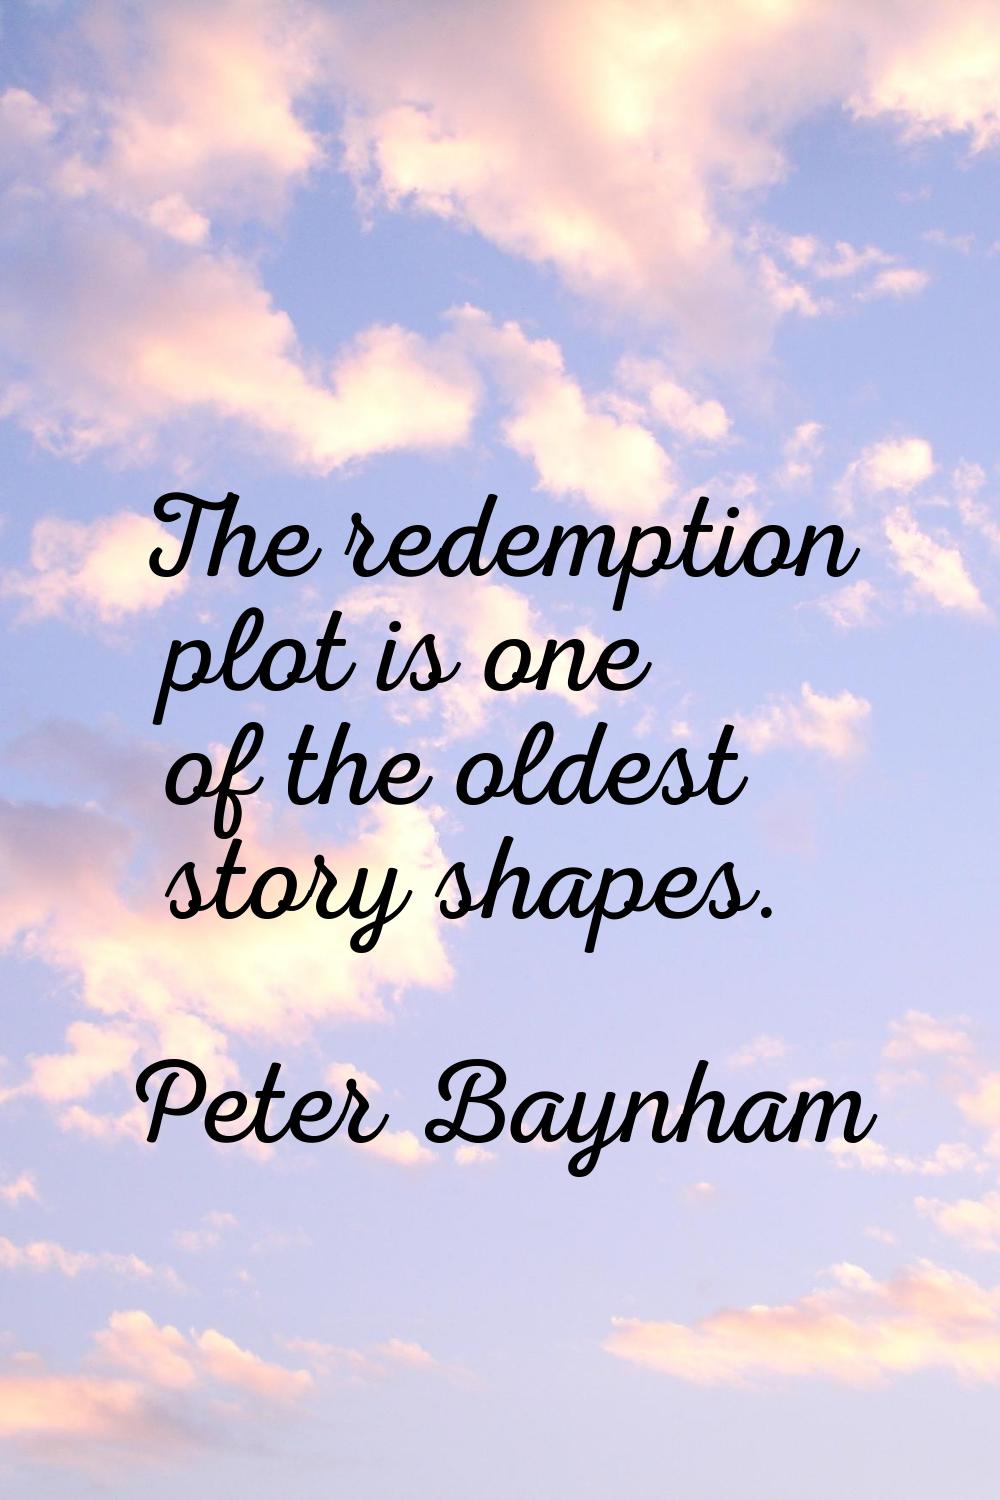 The redemption plot is one of the oldest story shapes.